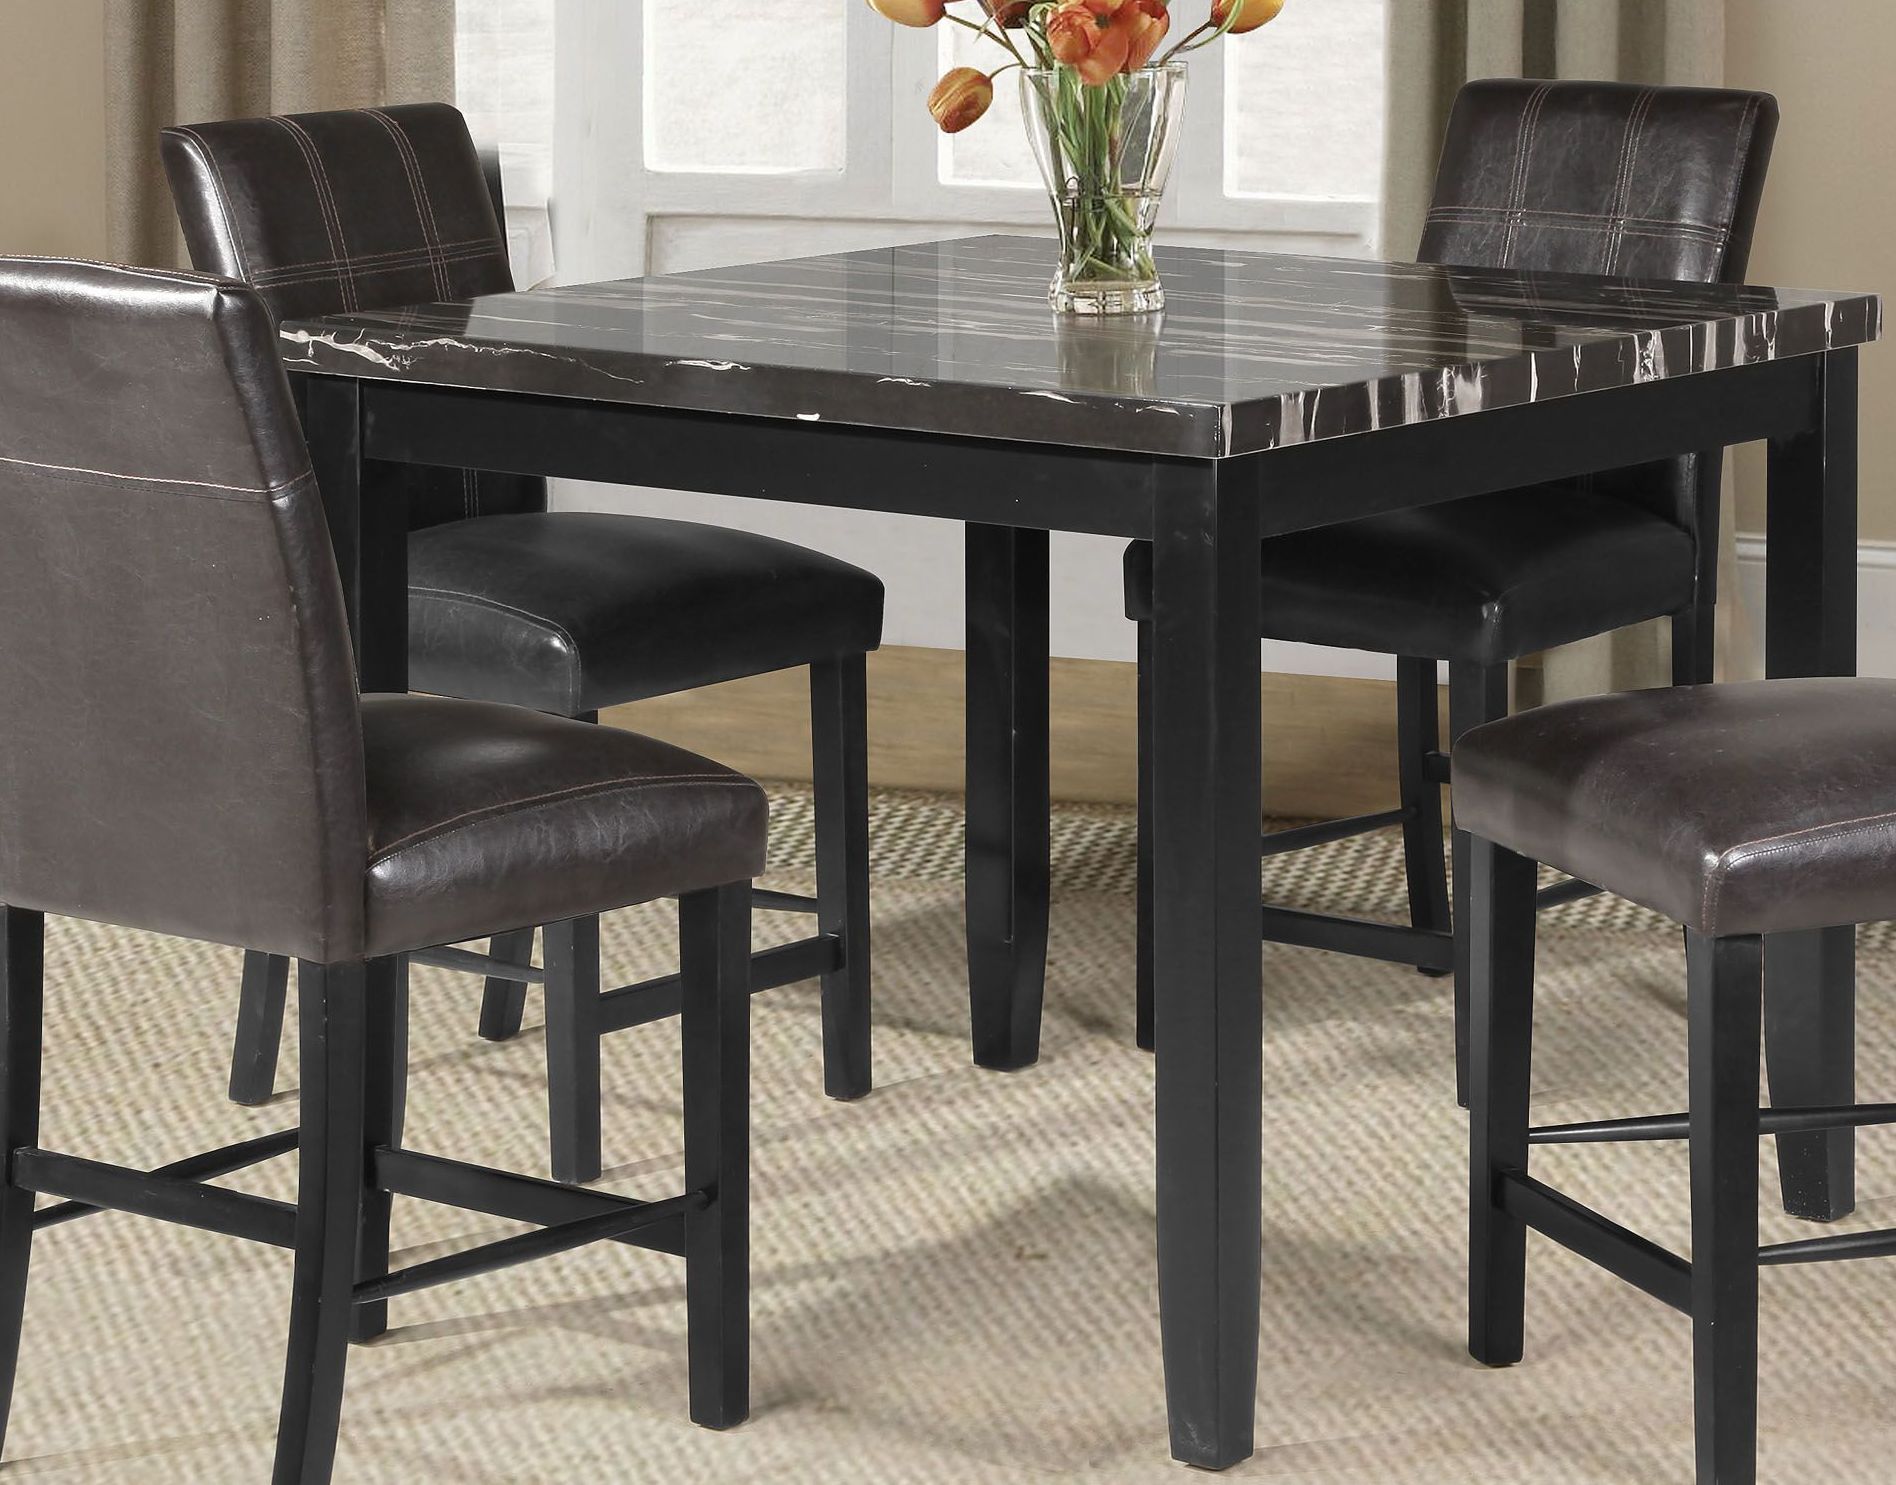 Acme Blythe Faux Marble And Black Counter Height Dining With Regard To 2017 Dallin Bar Height Dining Tables (View 5 of 15)